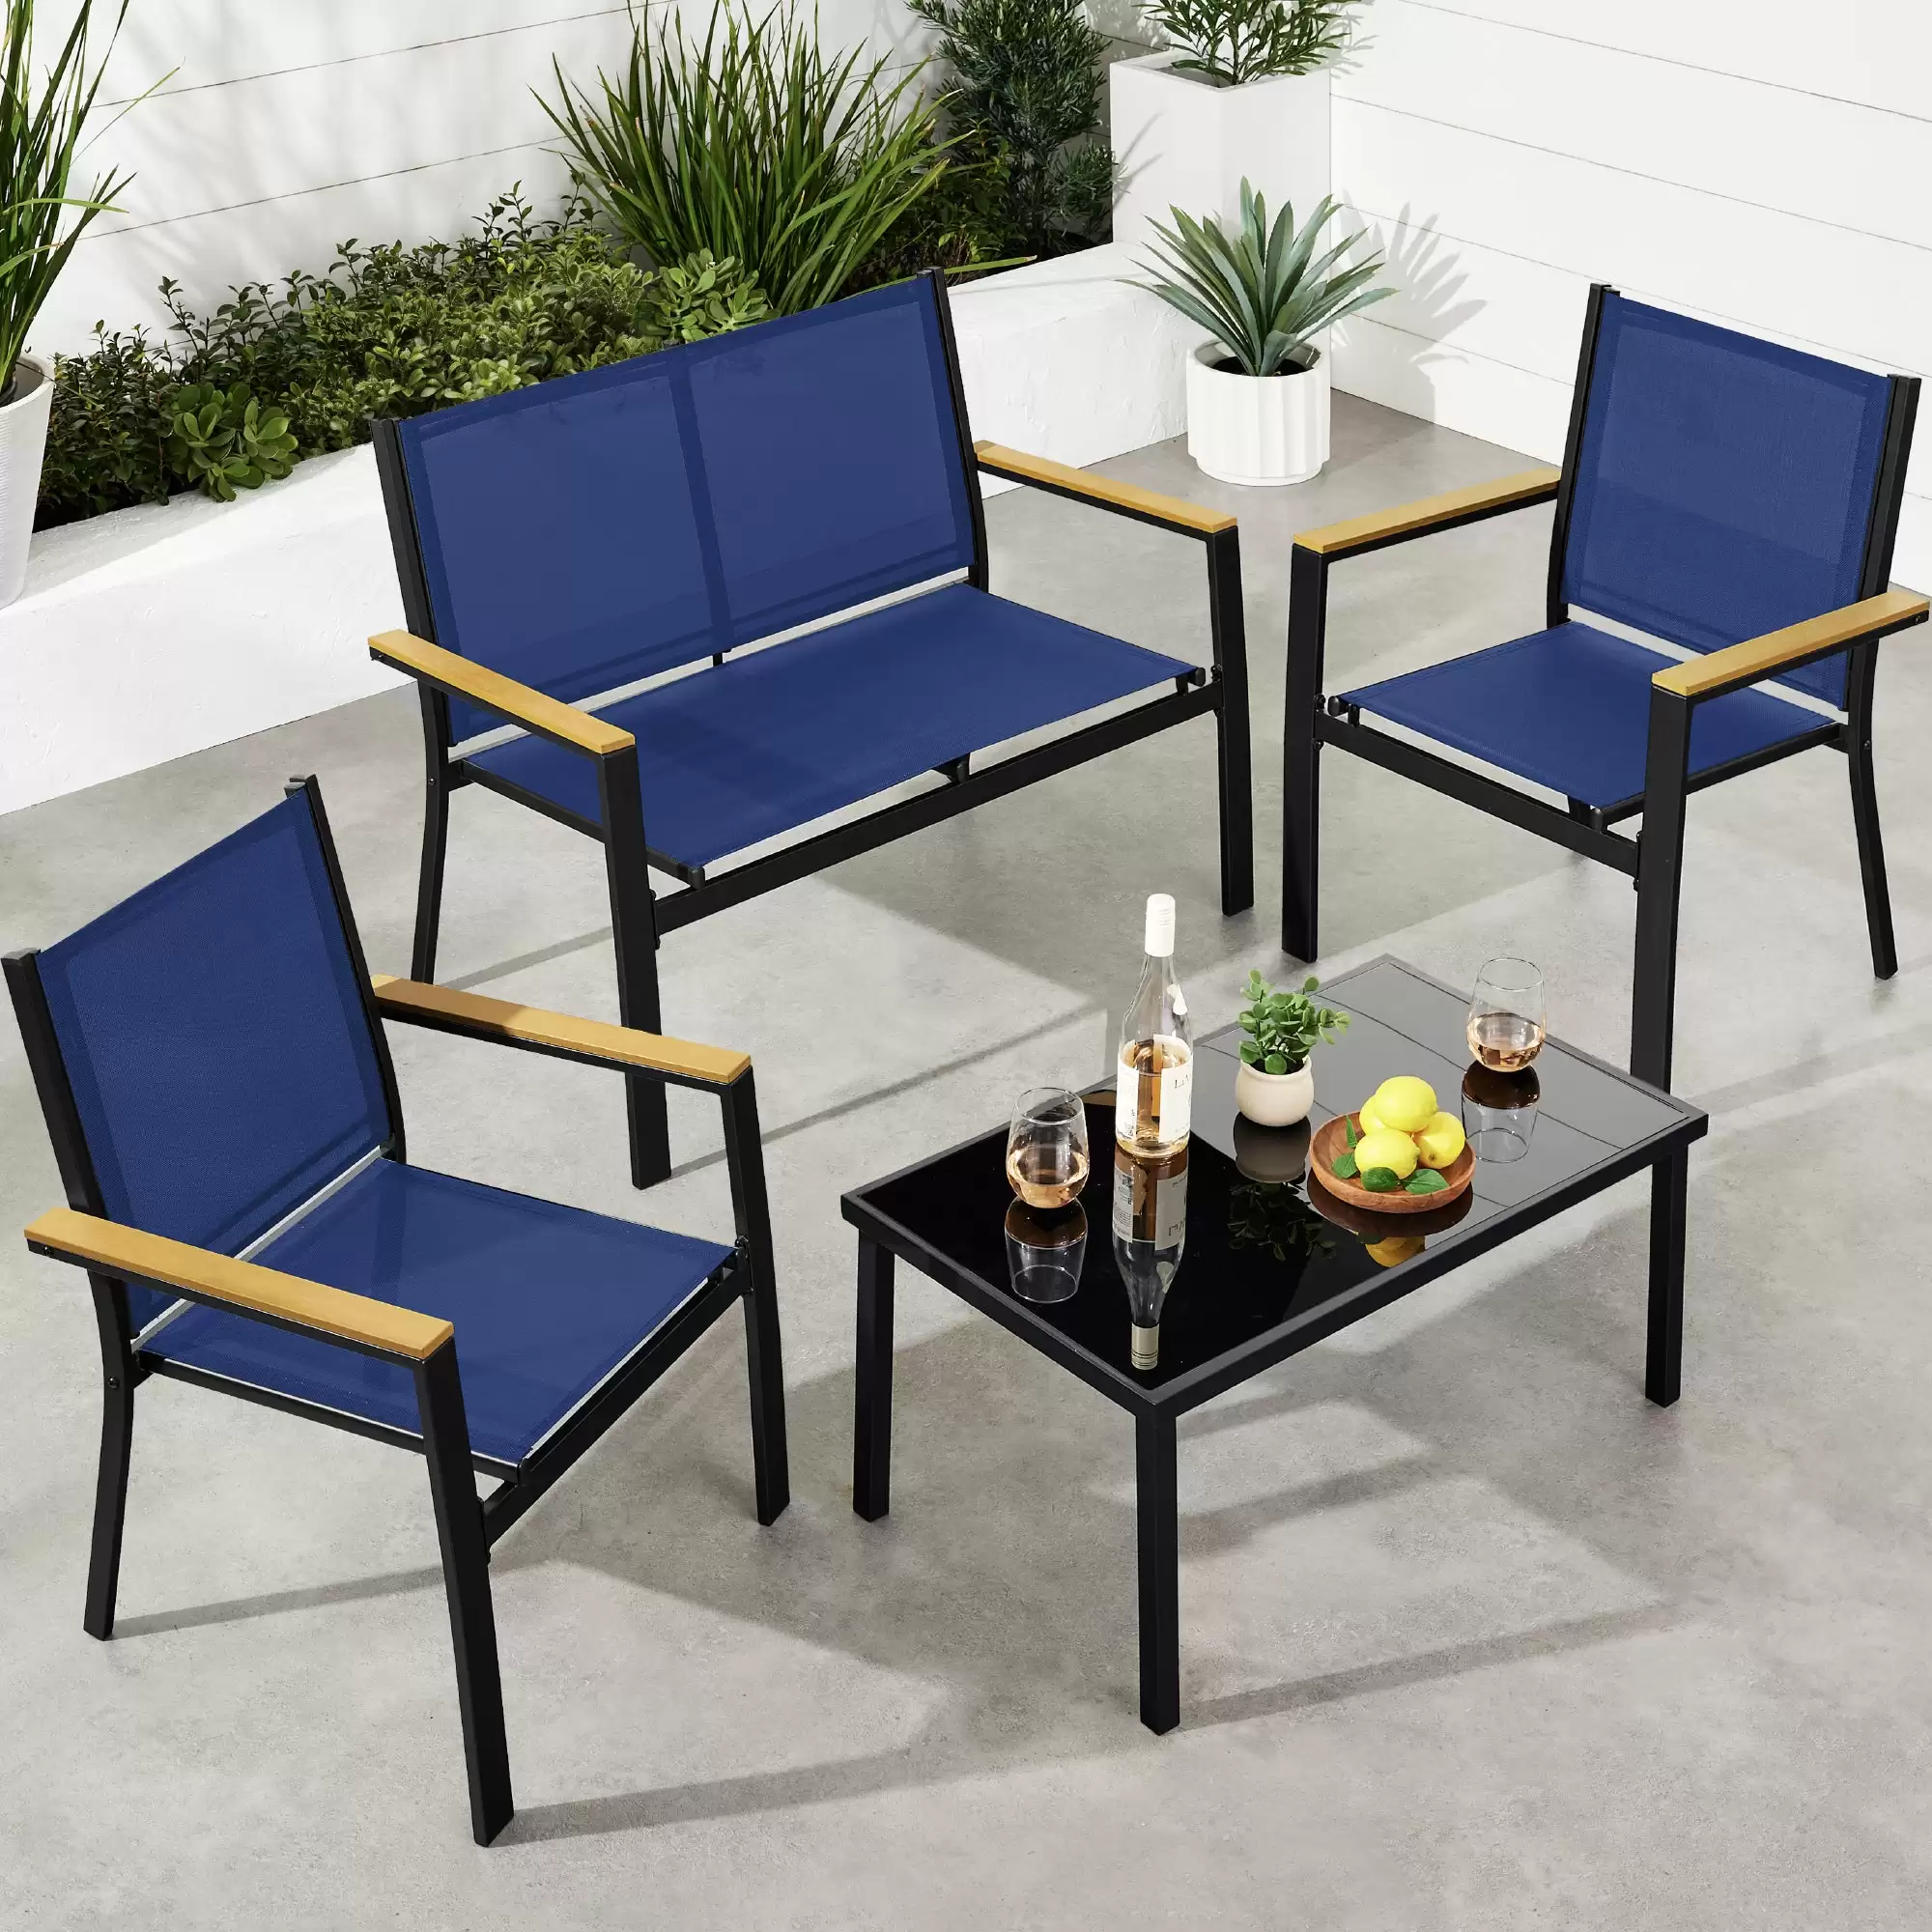 Pay $149.99 4-Piece Textilene Outdoor Conversation Set W/ Cushions, Table With This Bestchoiceproducts Discount Voucher